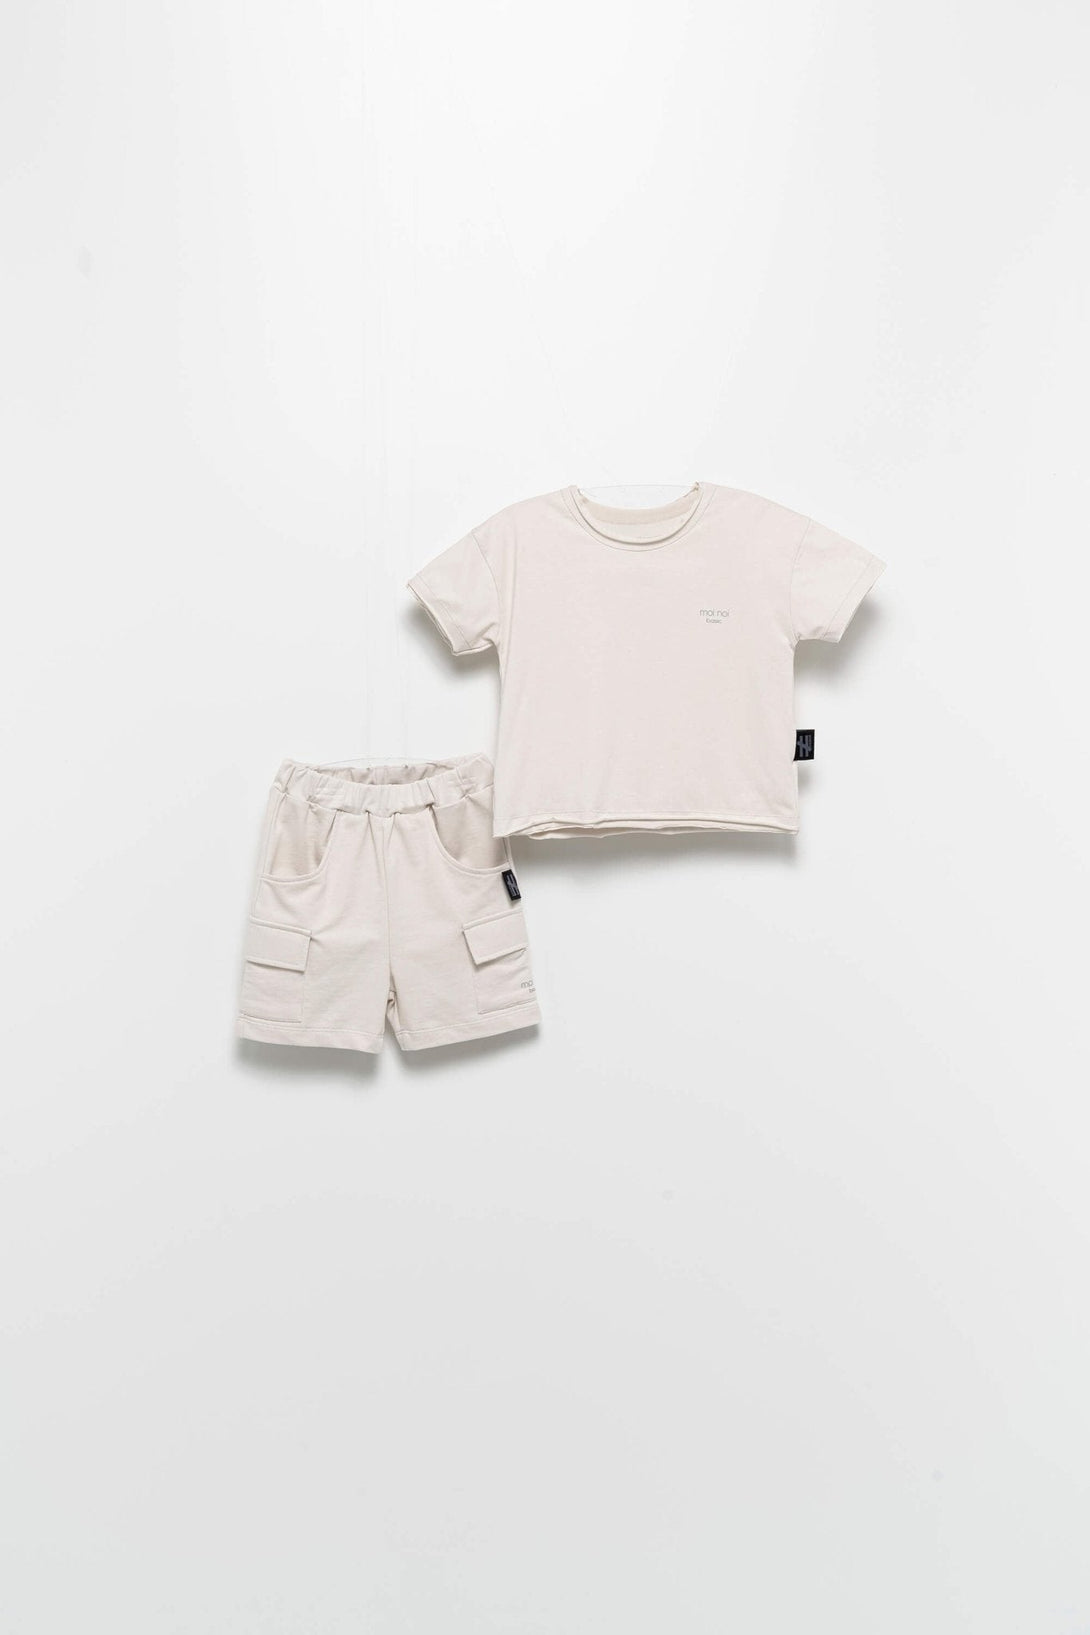 Round neck t-top paired with down pocket elastic short. - Negative Apparel